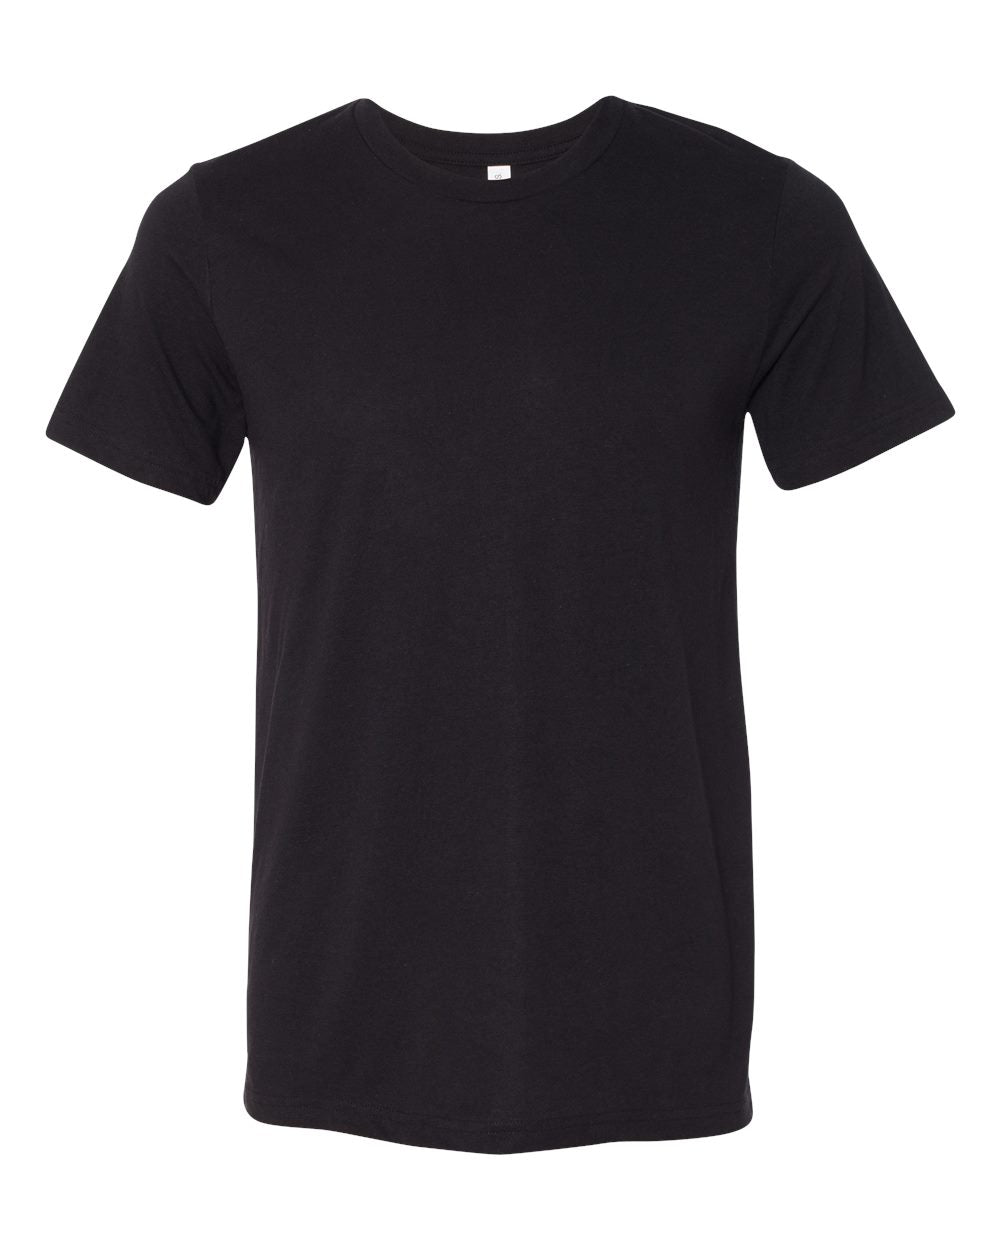 Bella + Canvas Triblend Tee (3413) in Solid Black Triblend